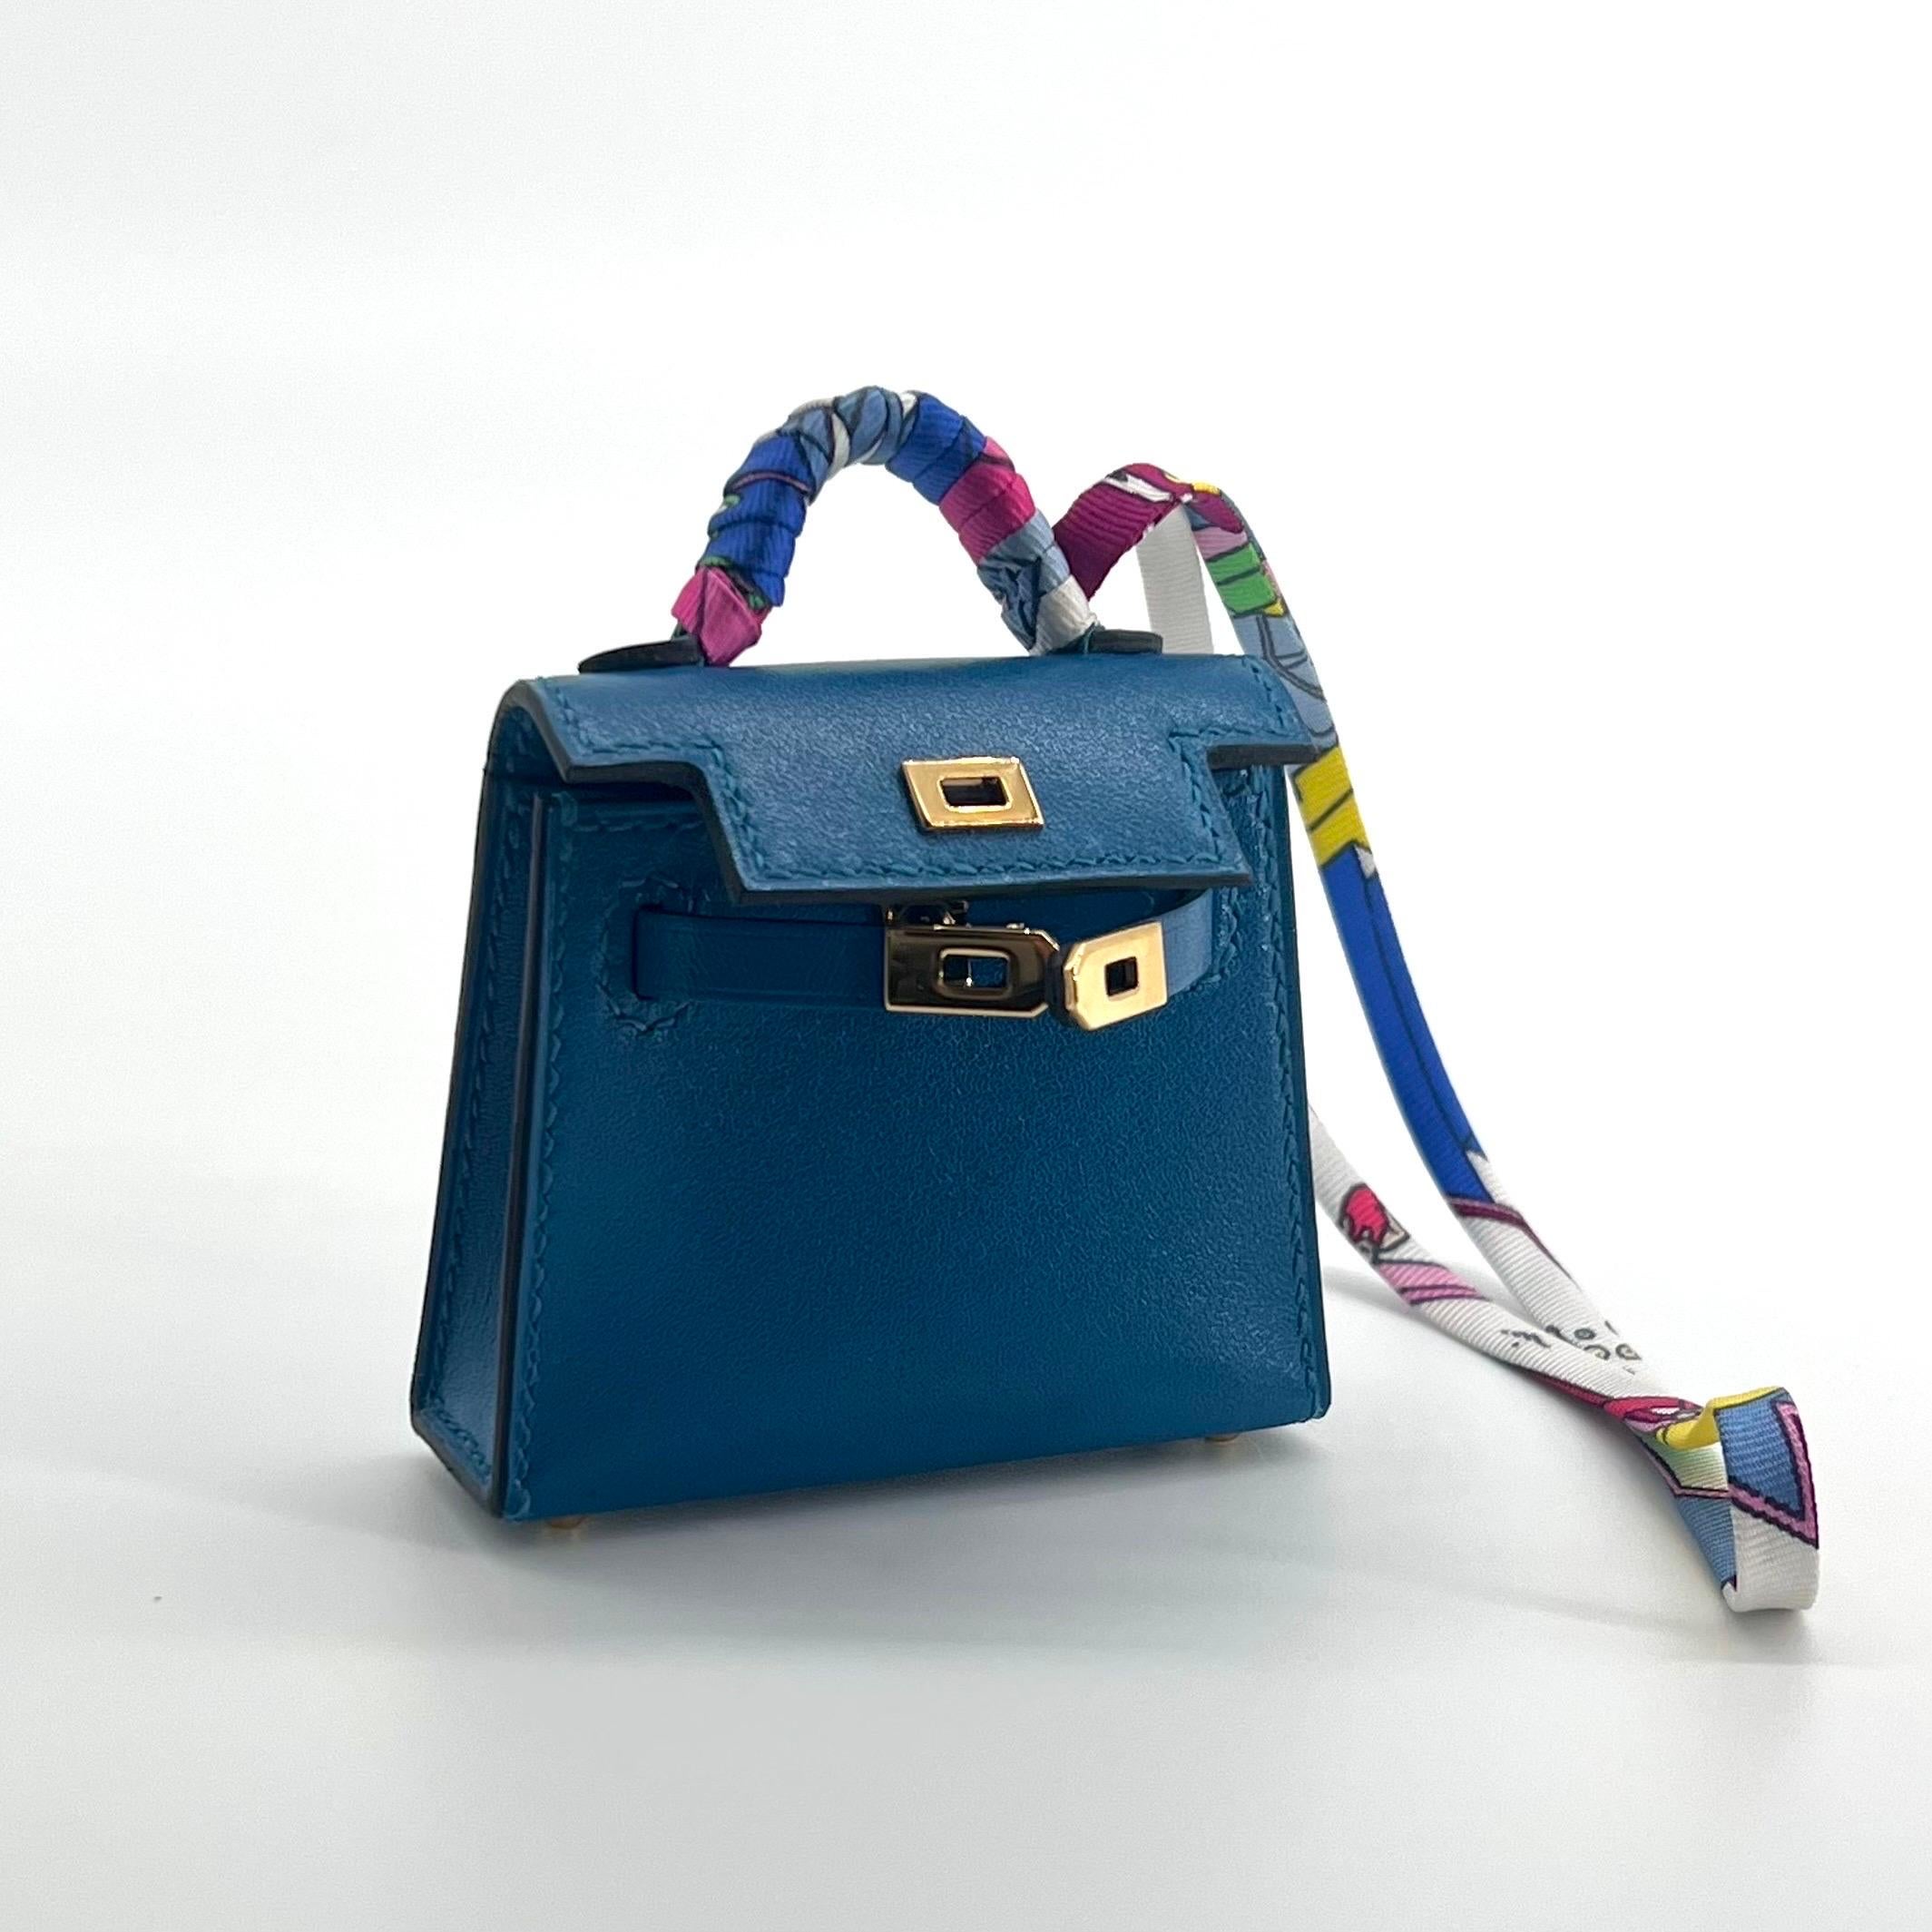 This Micro Mini Kelly Twilly bag charm from Hermès is the smallest Mini Kelly bag. This Hermès Kelly Twilly Charm is made from Veau Tadelakt leather with a Gold Hardware. Similar to swift leather. The beautiful charm is in the colour of Bleu Izmir